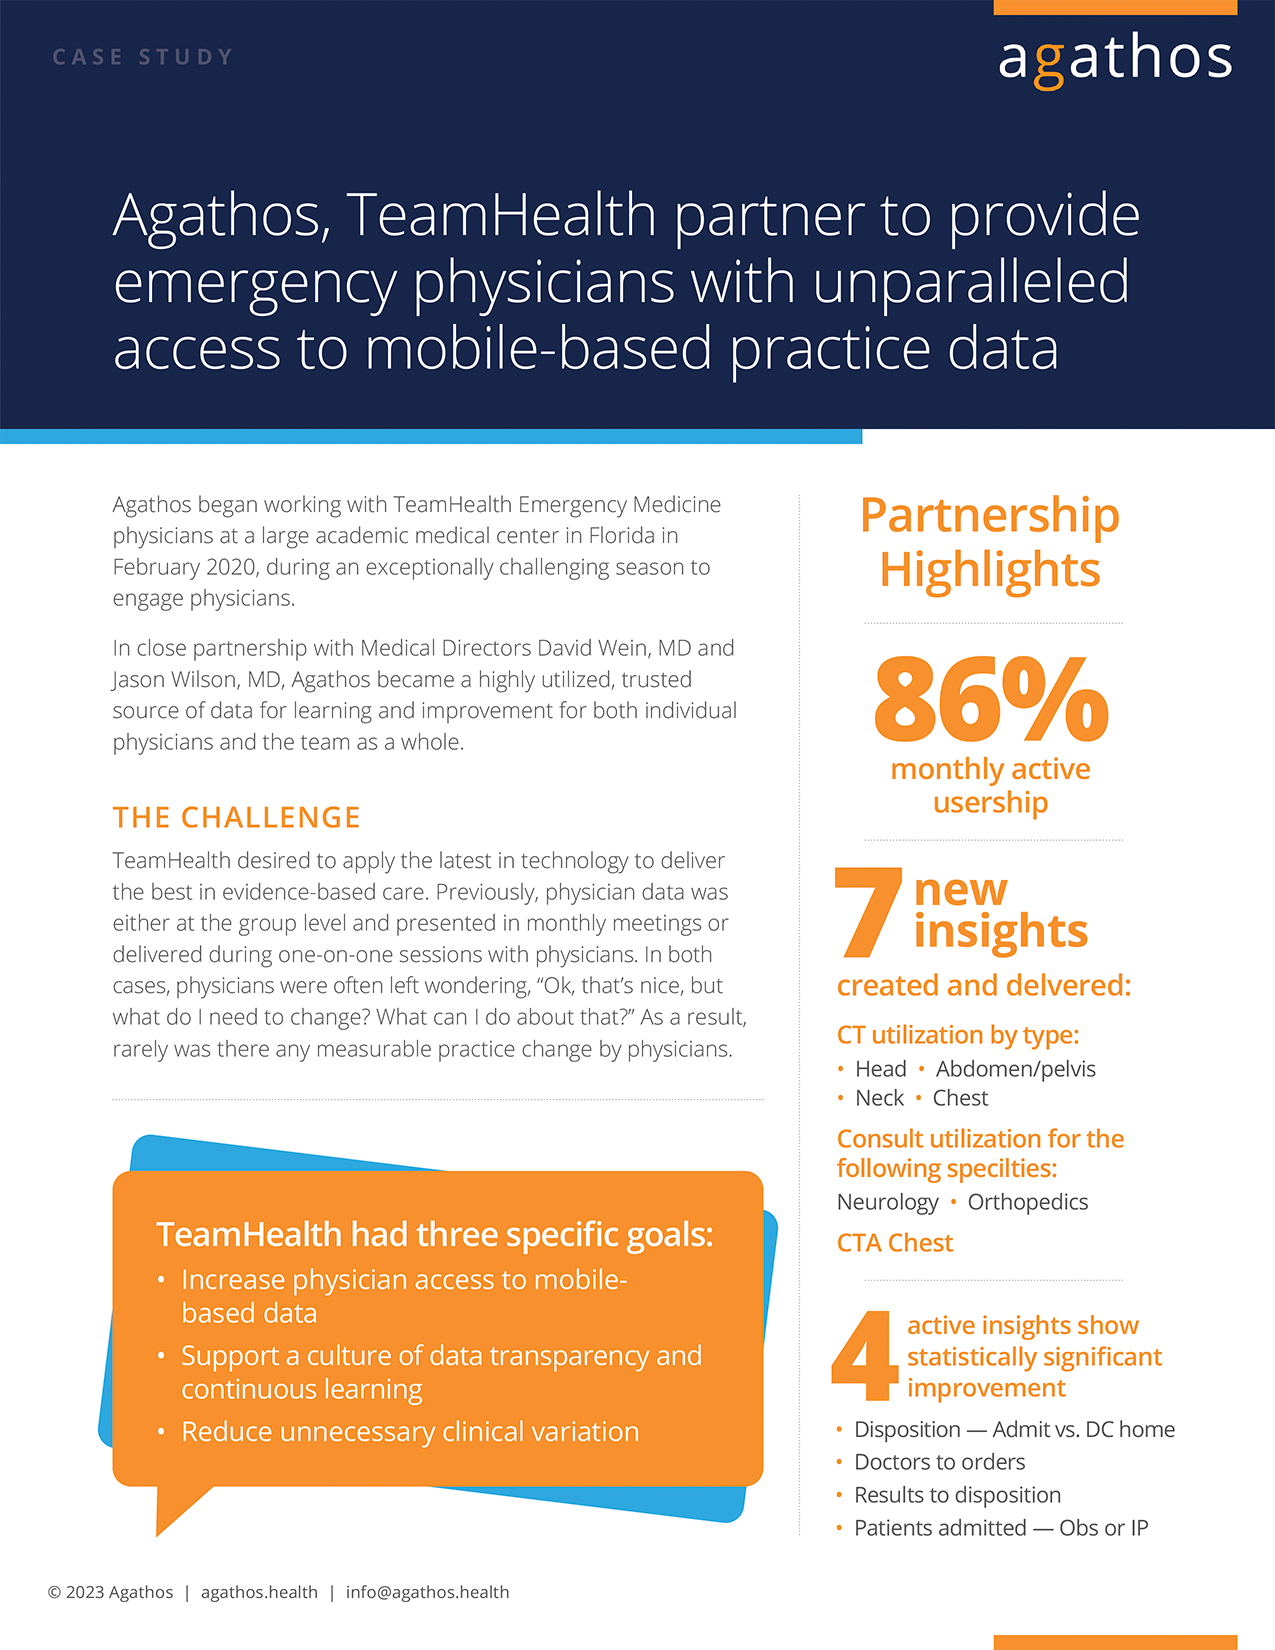 TeamHealth Case Study Cover Image